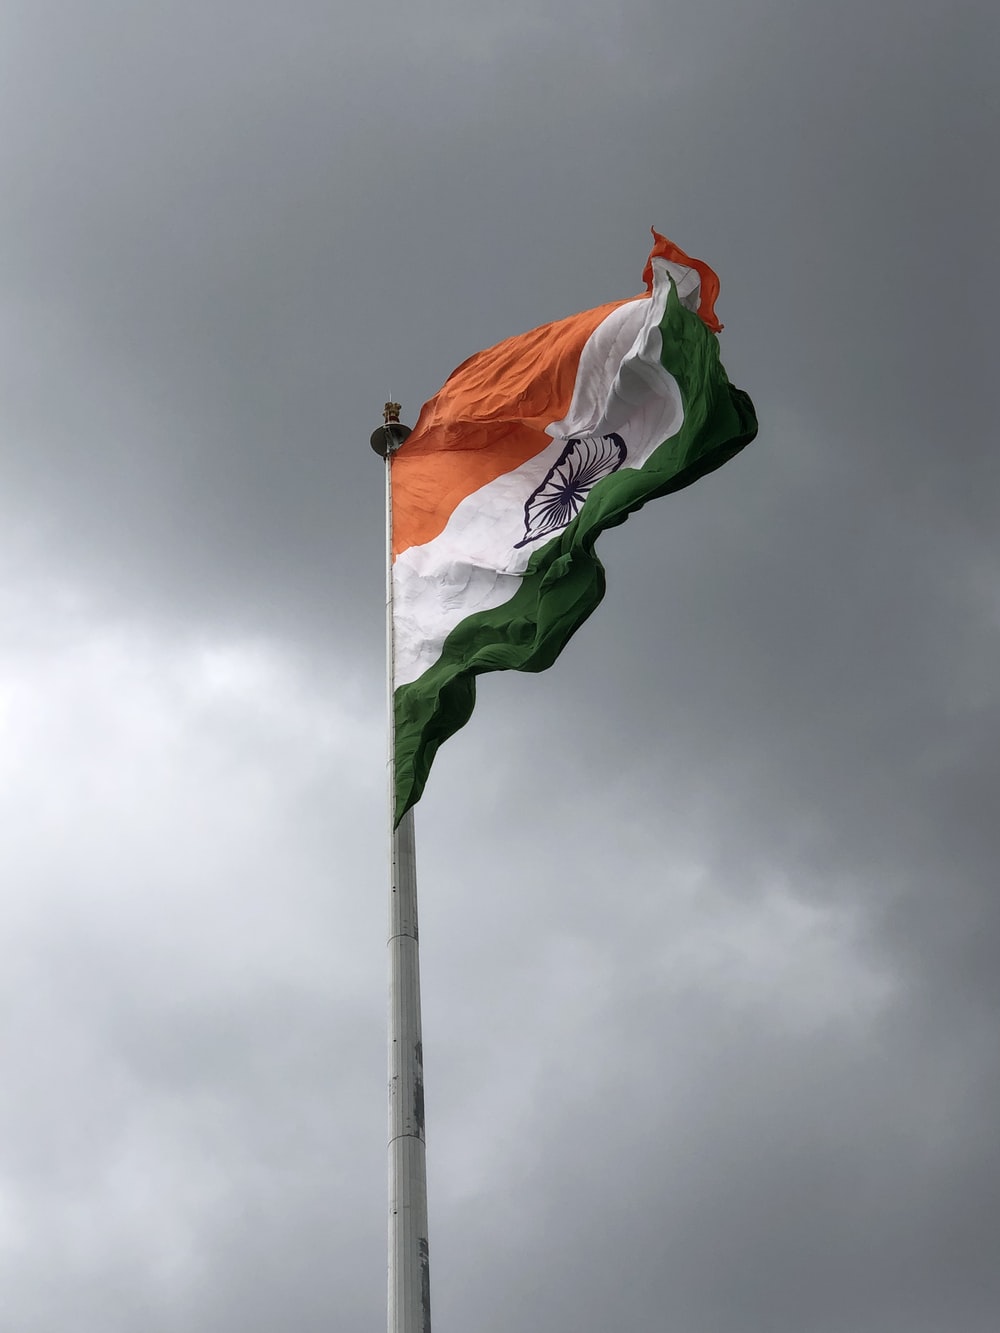 Indian Flag Picture. Download Free Image